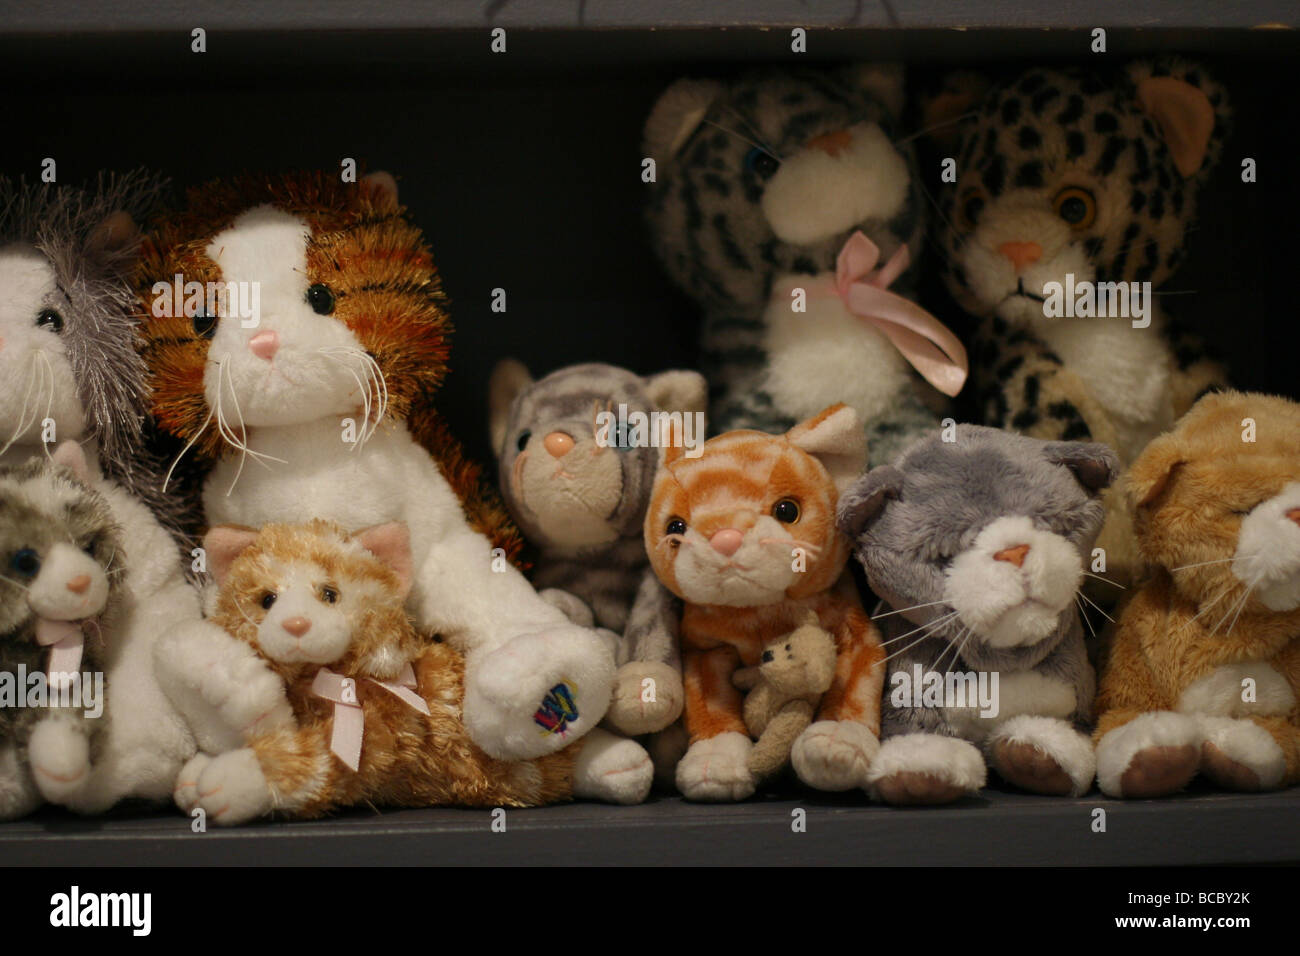 A bunch of stuffed cat toys on a shelf. Stock Photo